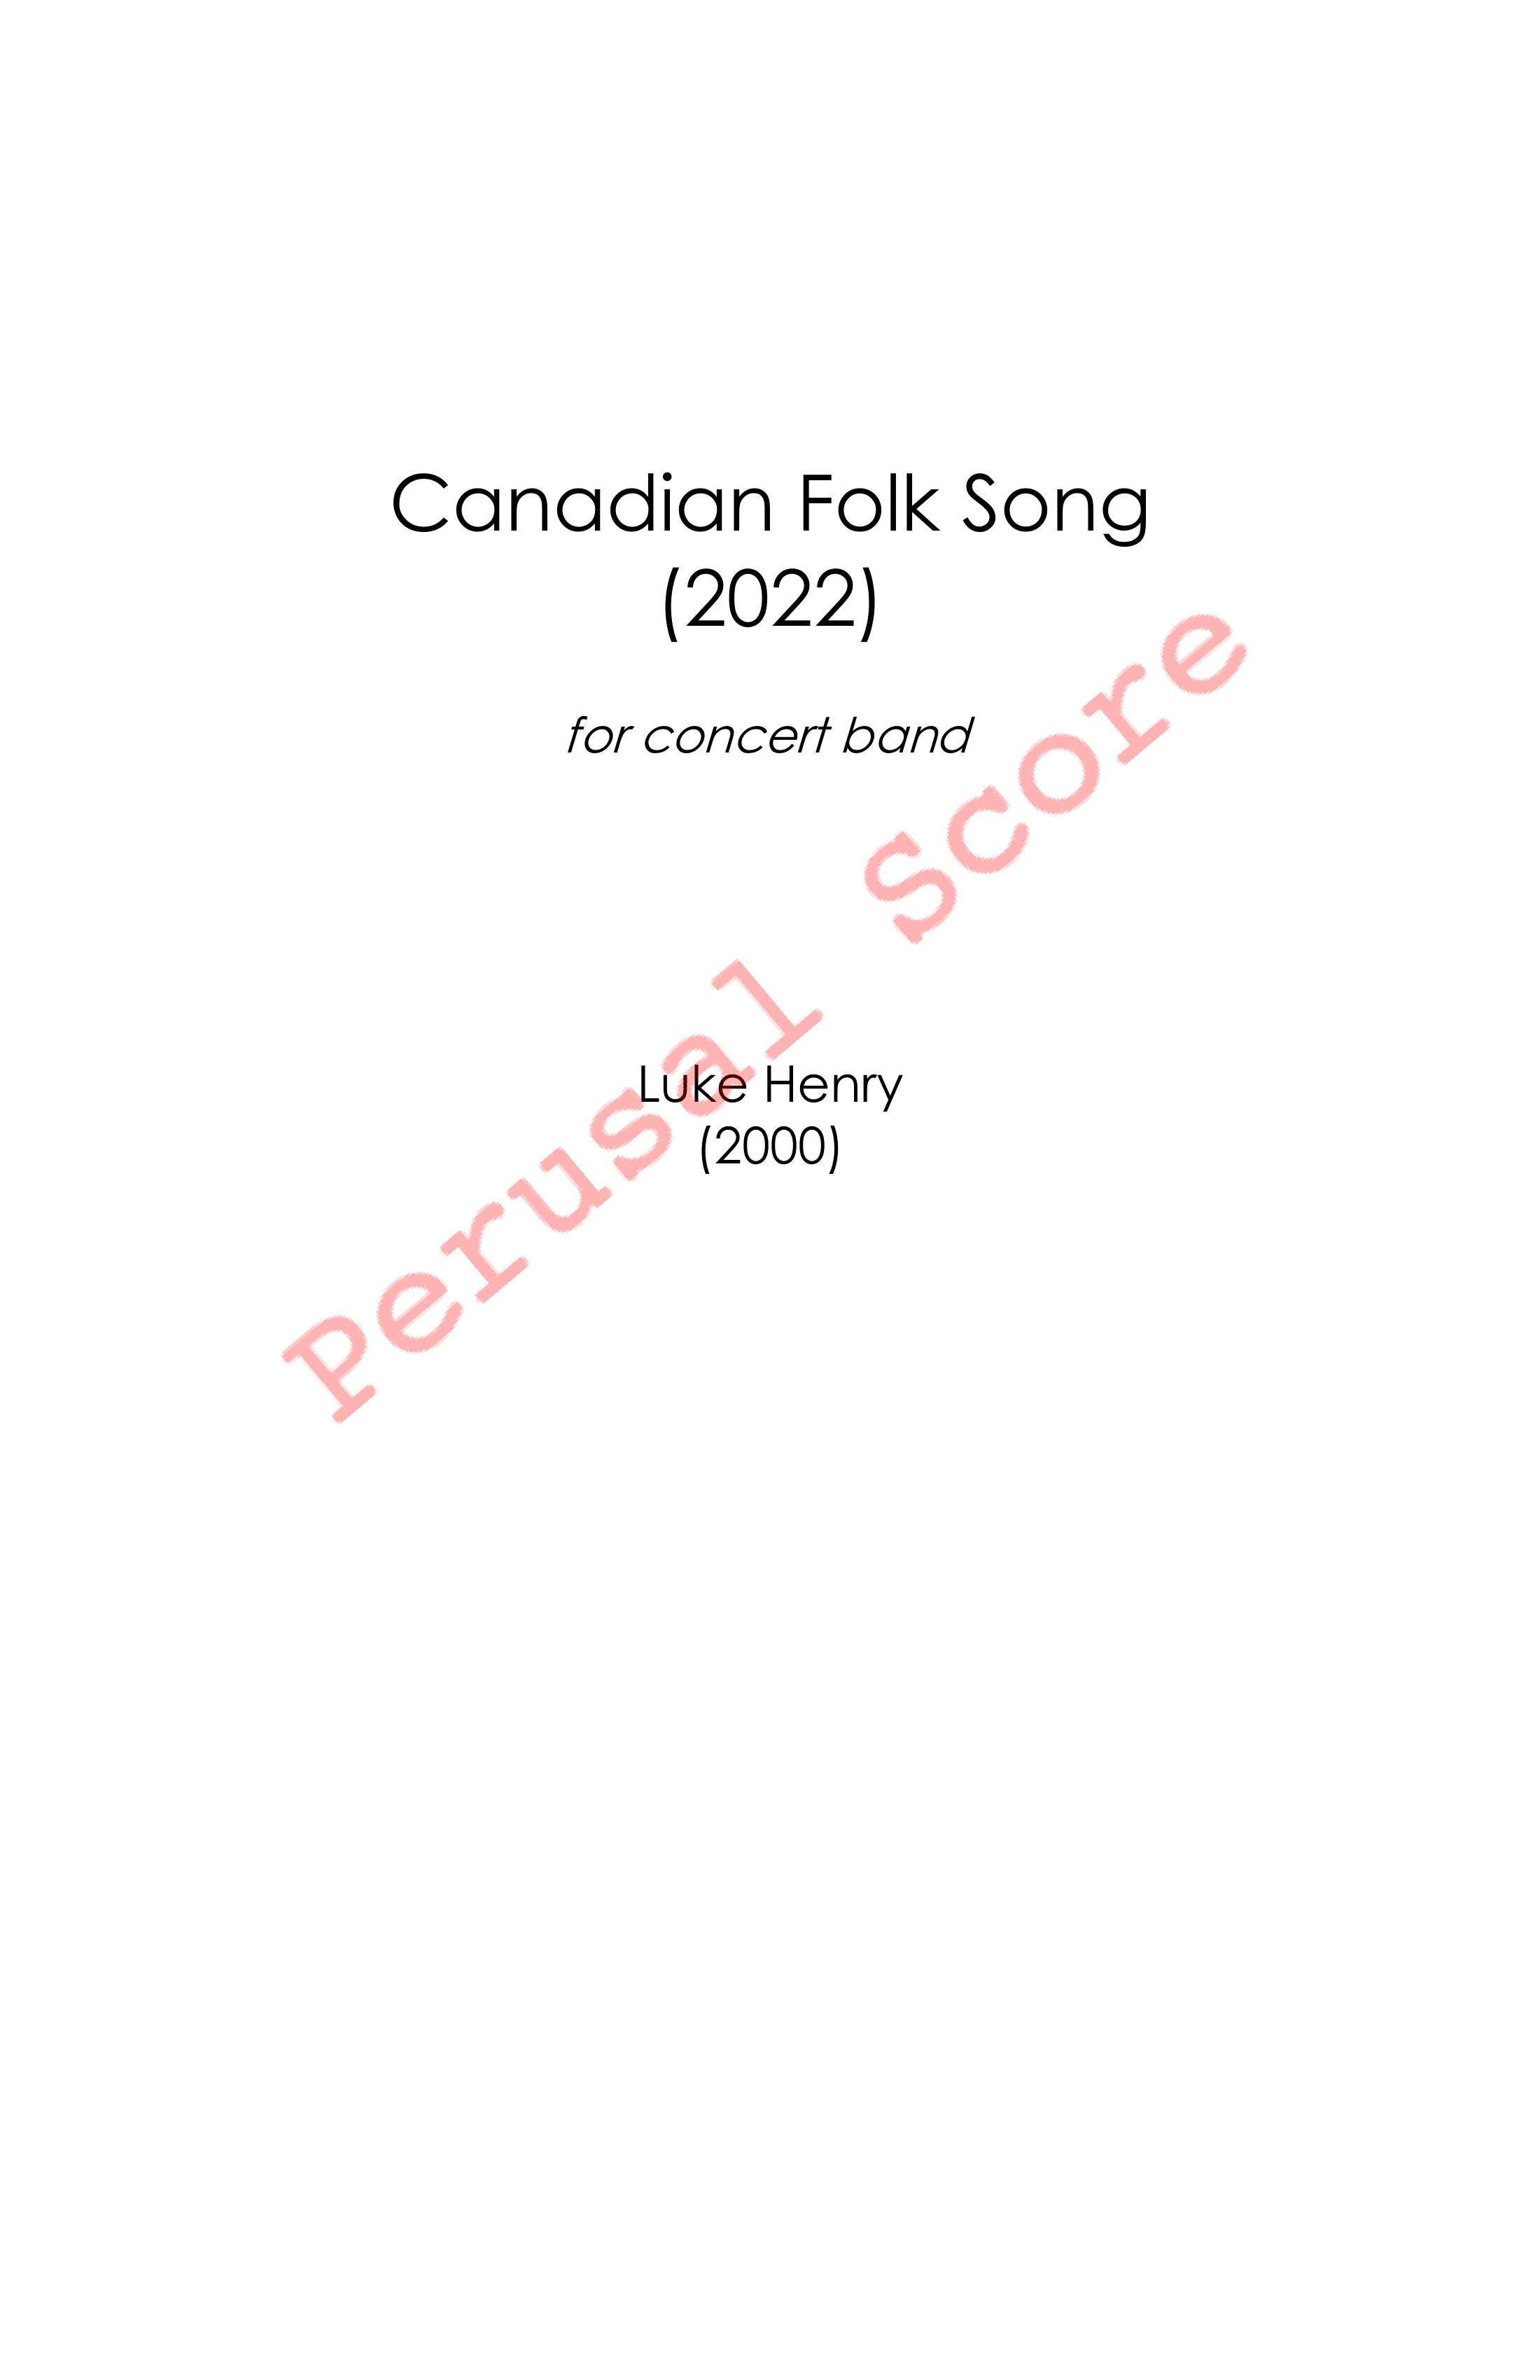 Canadian Folk Song - FINISHED 4.18.23- Full Score perusal score-01.png